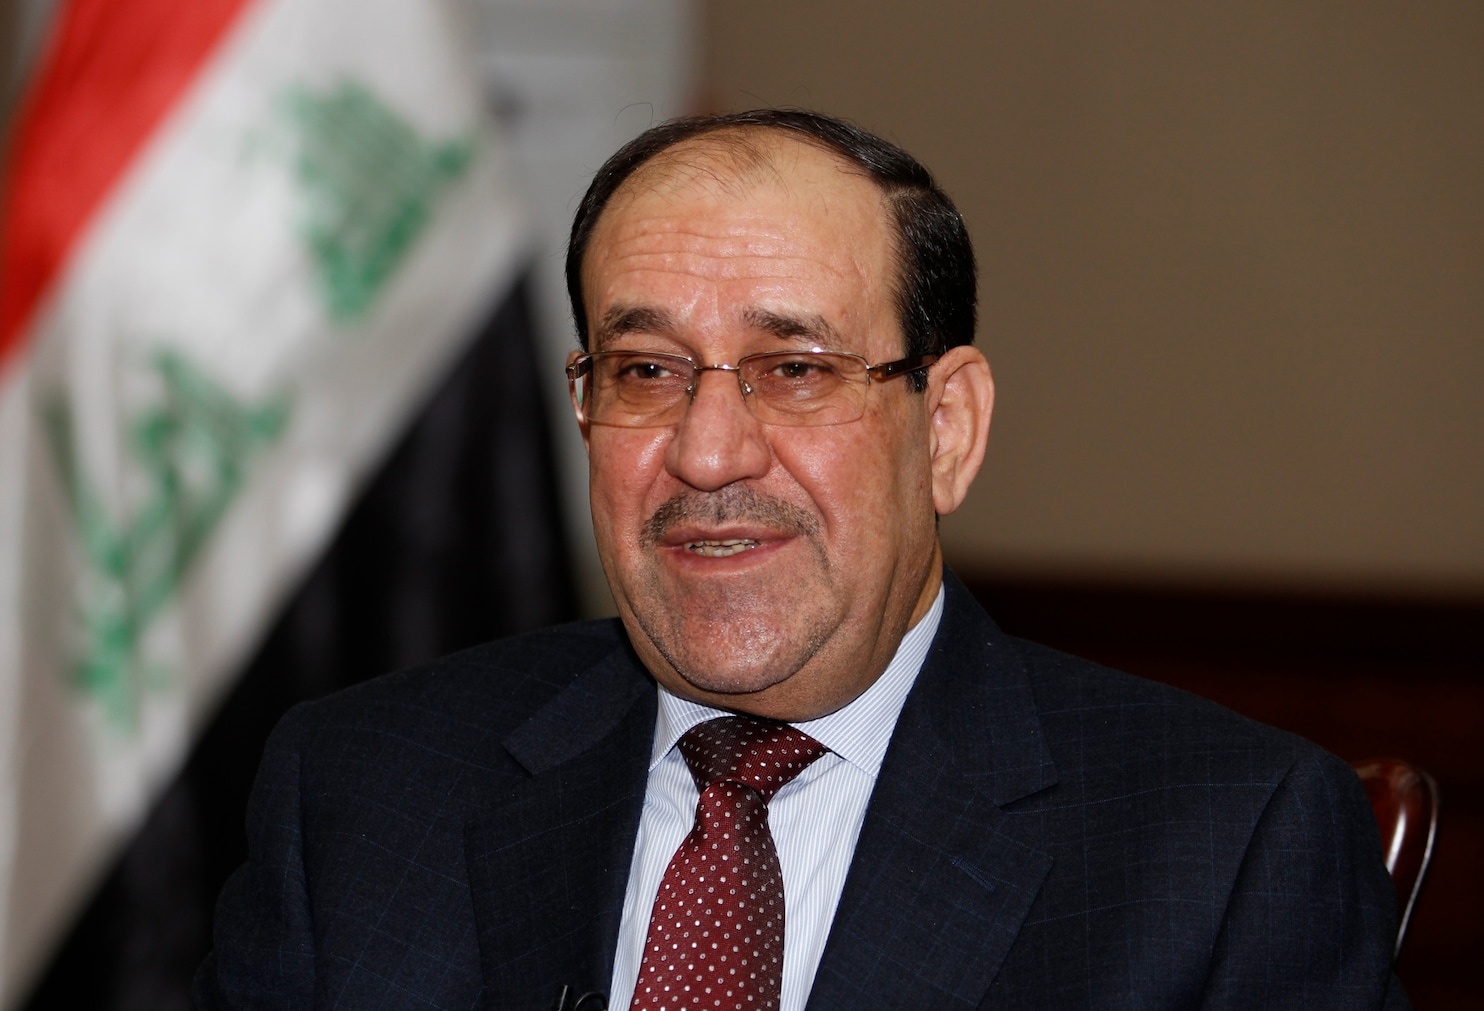 Nouri Maliki says no early elections will be in Iraq